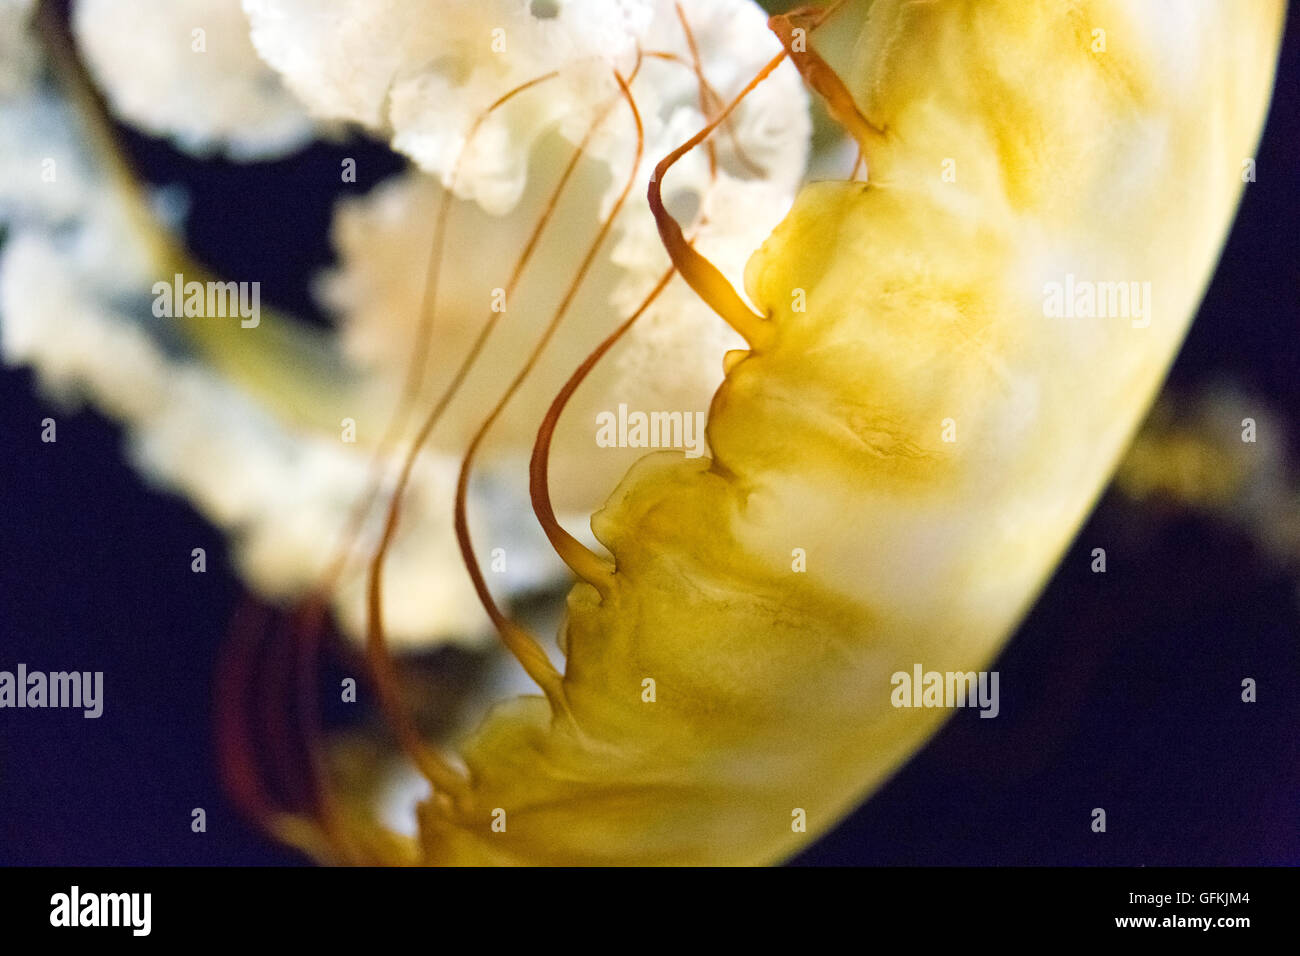 Pacific sea nettle, species of jellyfish Stock Photo